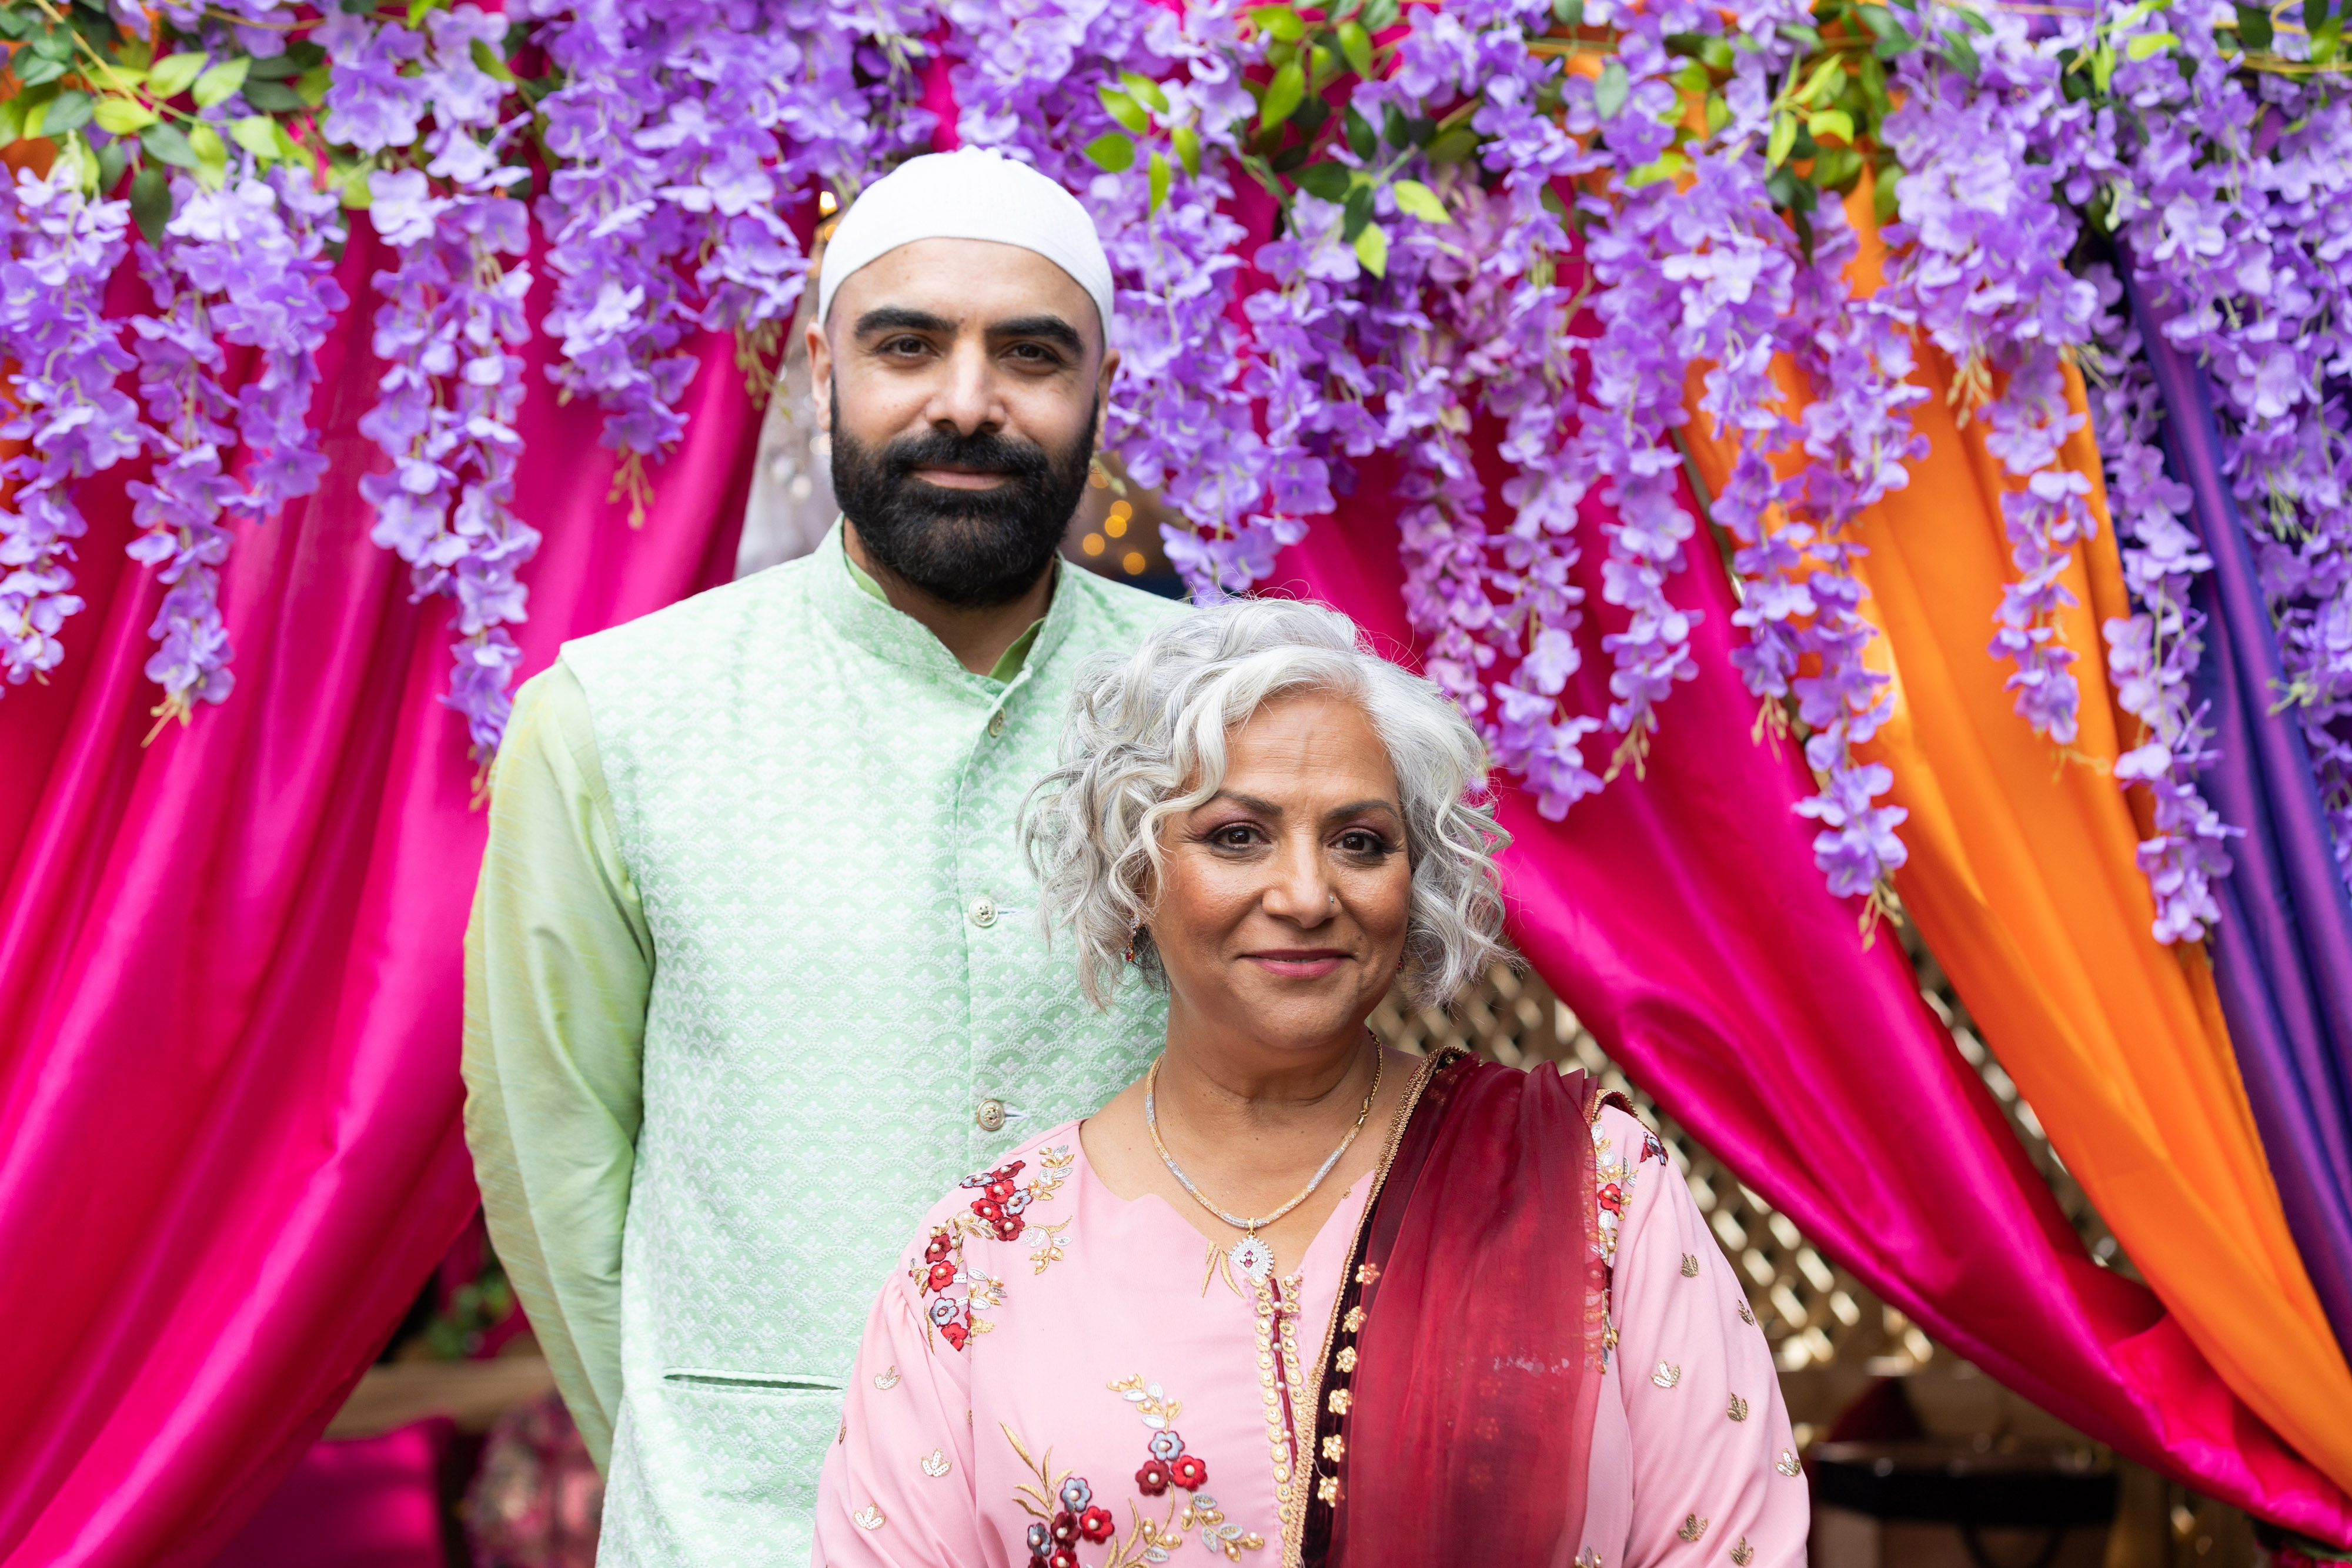 Zain and Misbah on their wedding day in Hollyoaks.